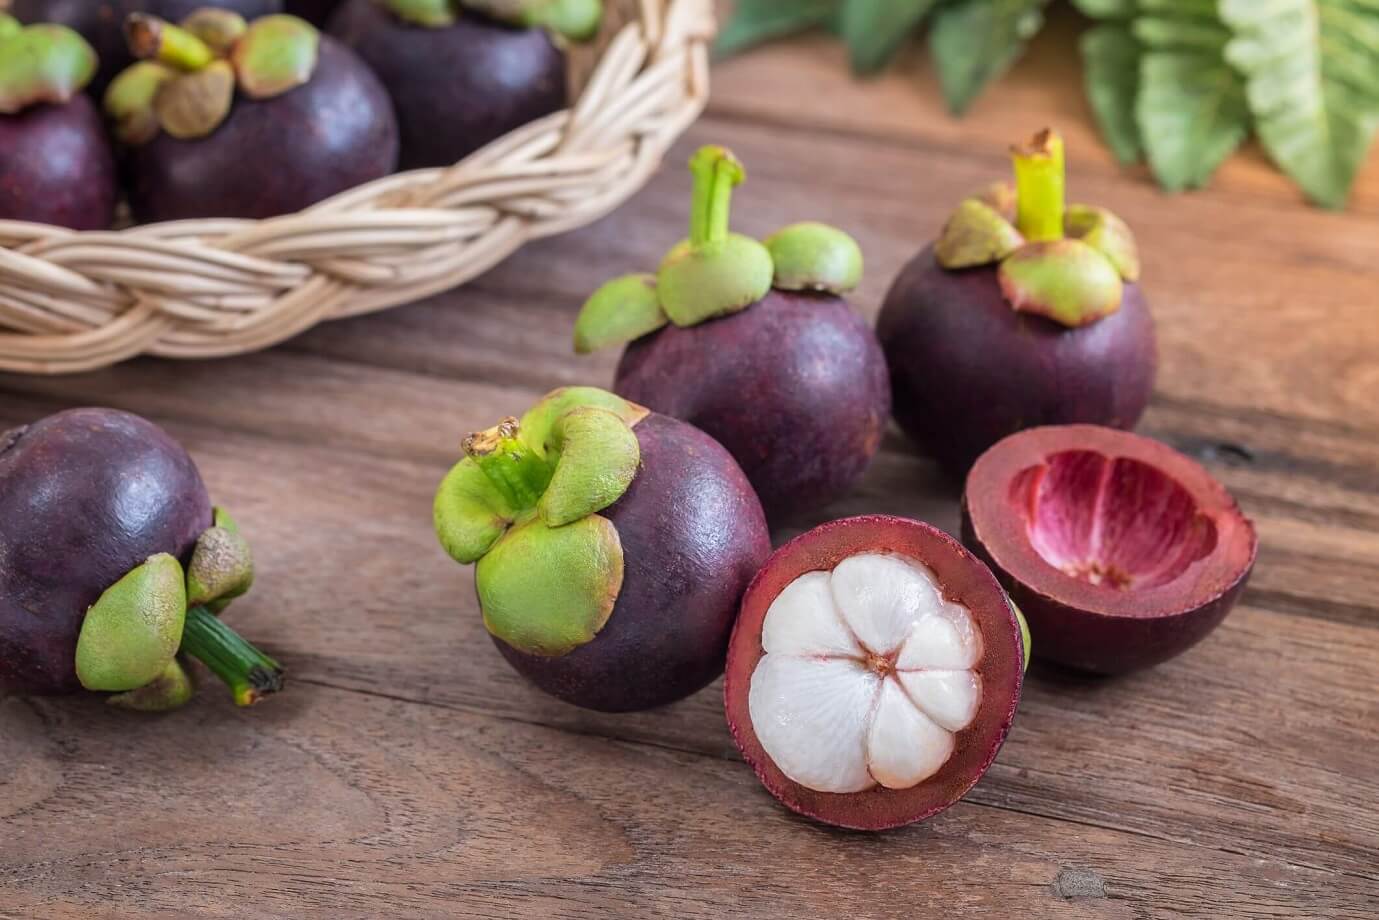 12 Benefits of Mangosteen for Health and as an Antioxidant